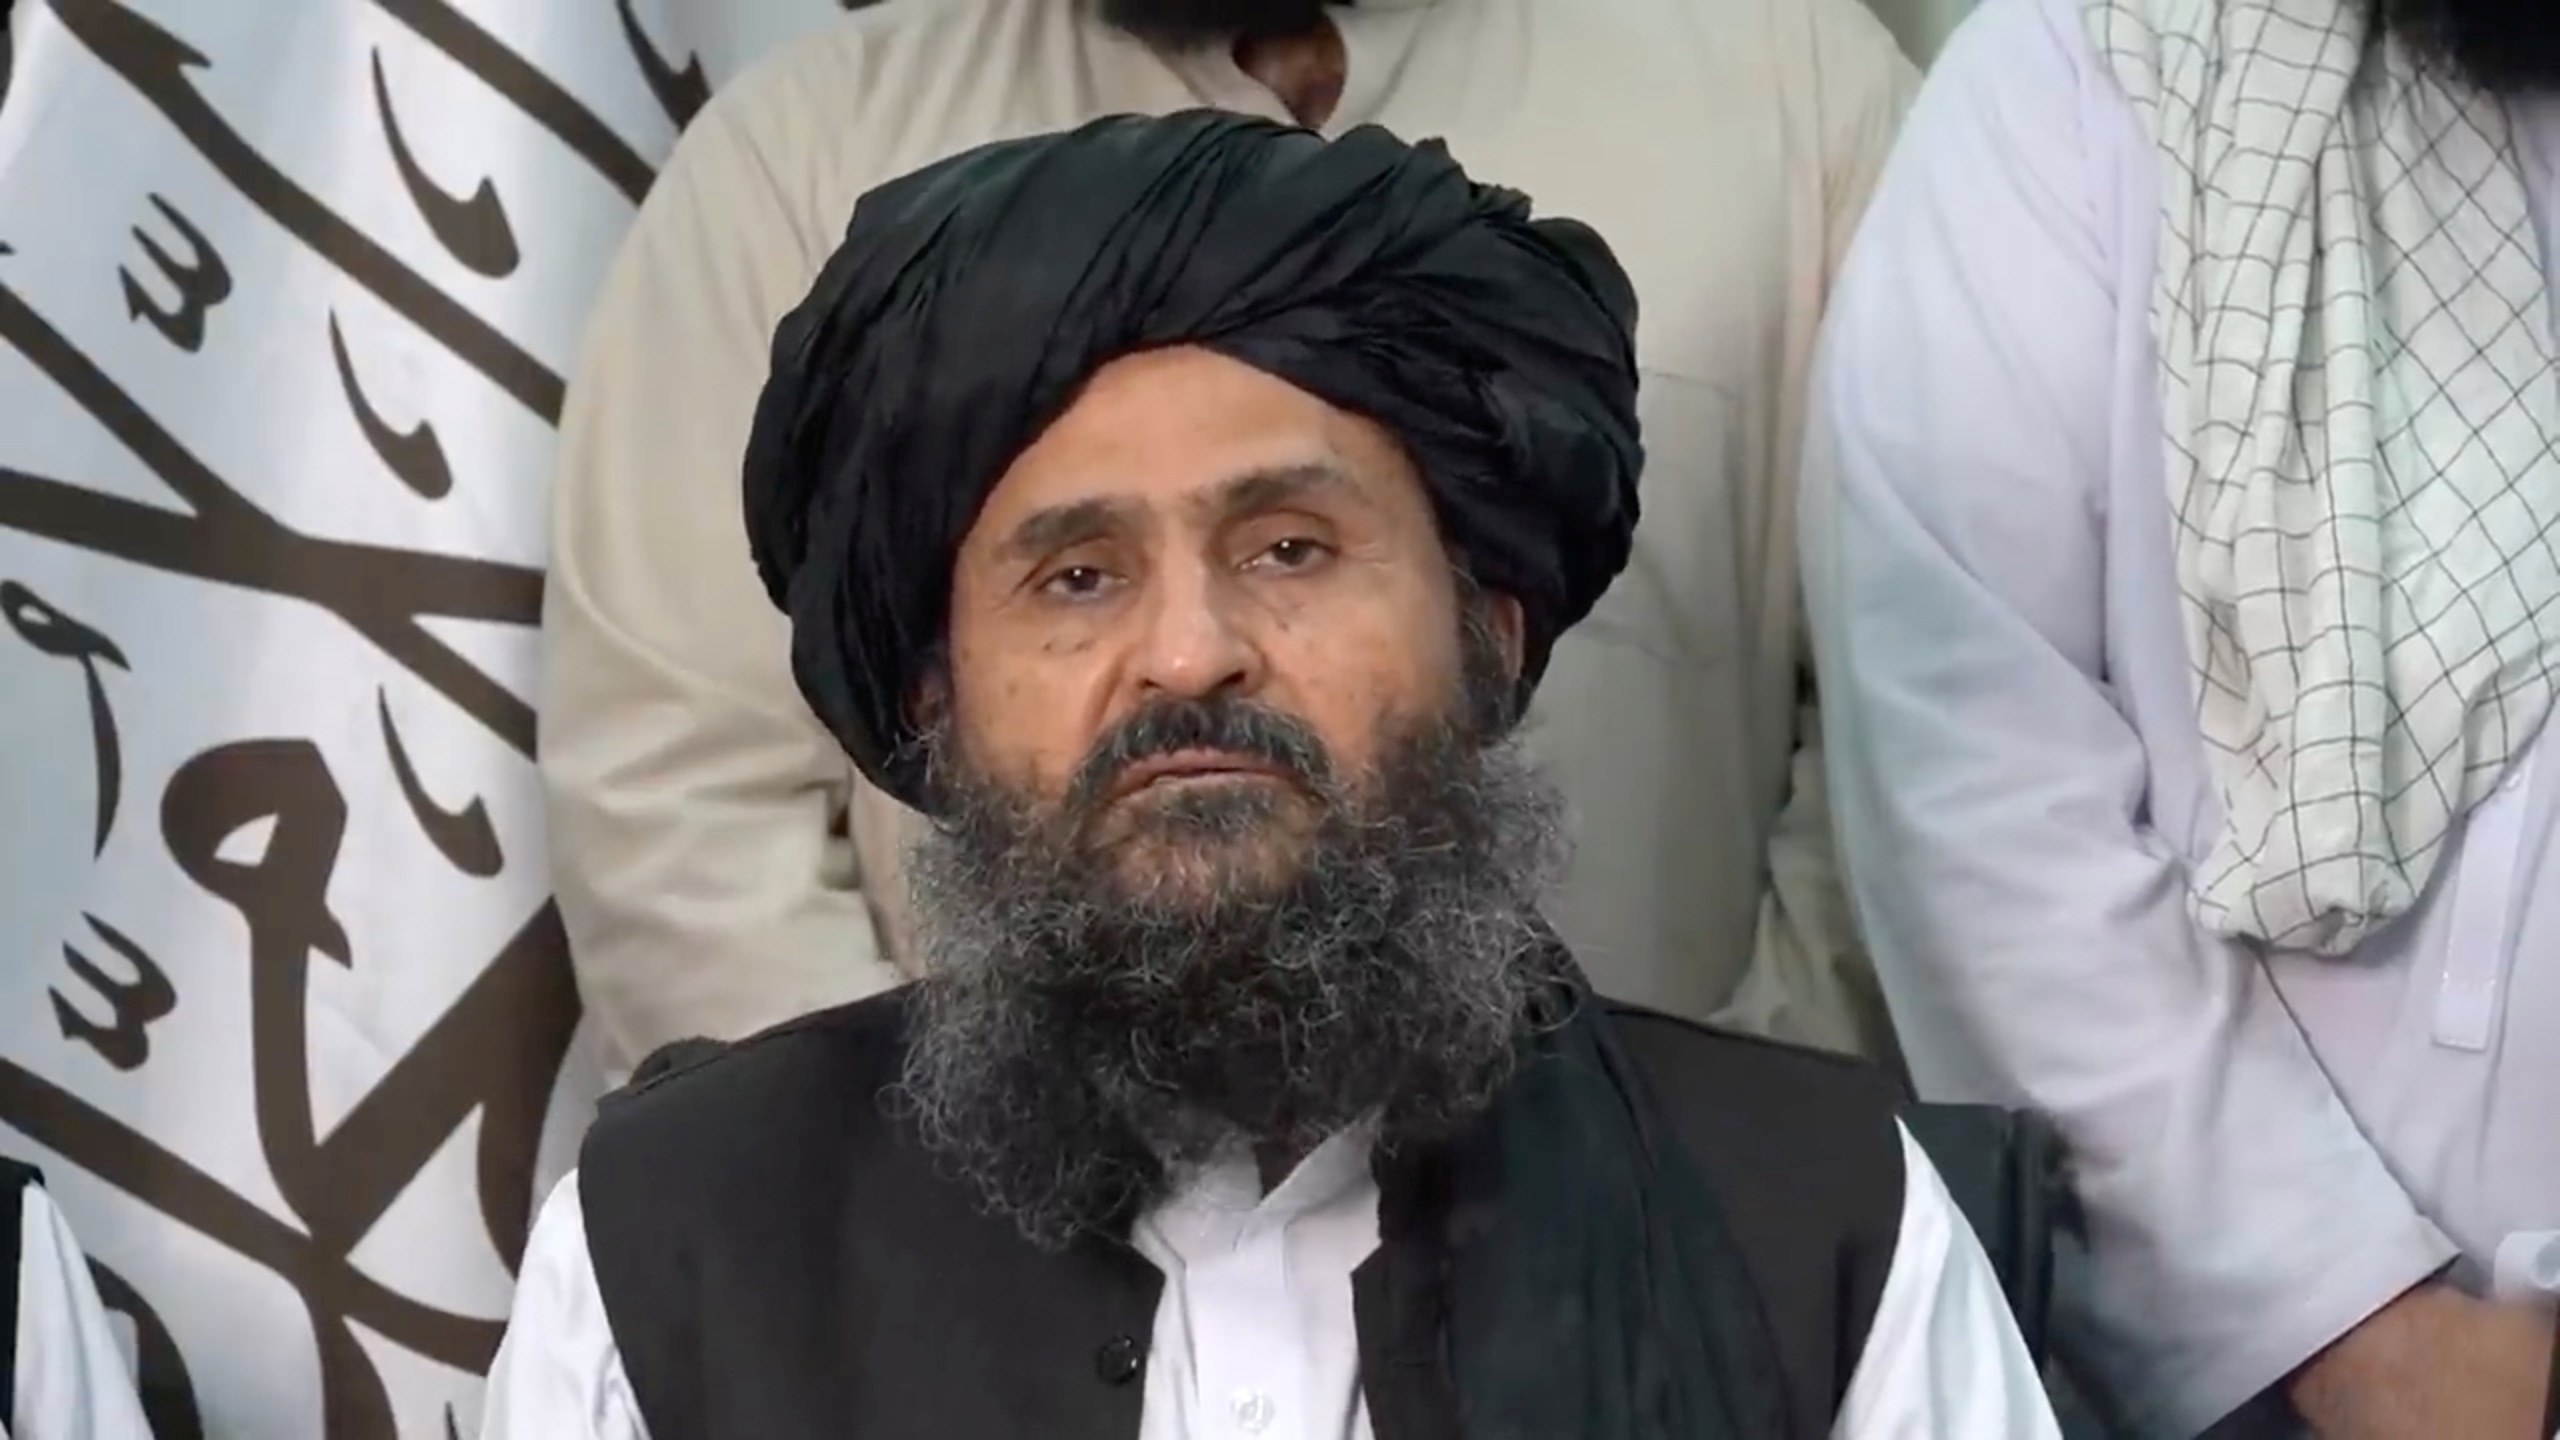 Mullah Baradar to lead new Afghanistan government - Taliban sources |  Reuters